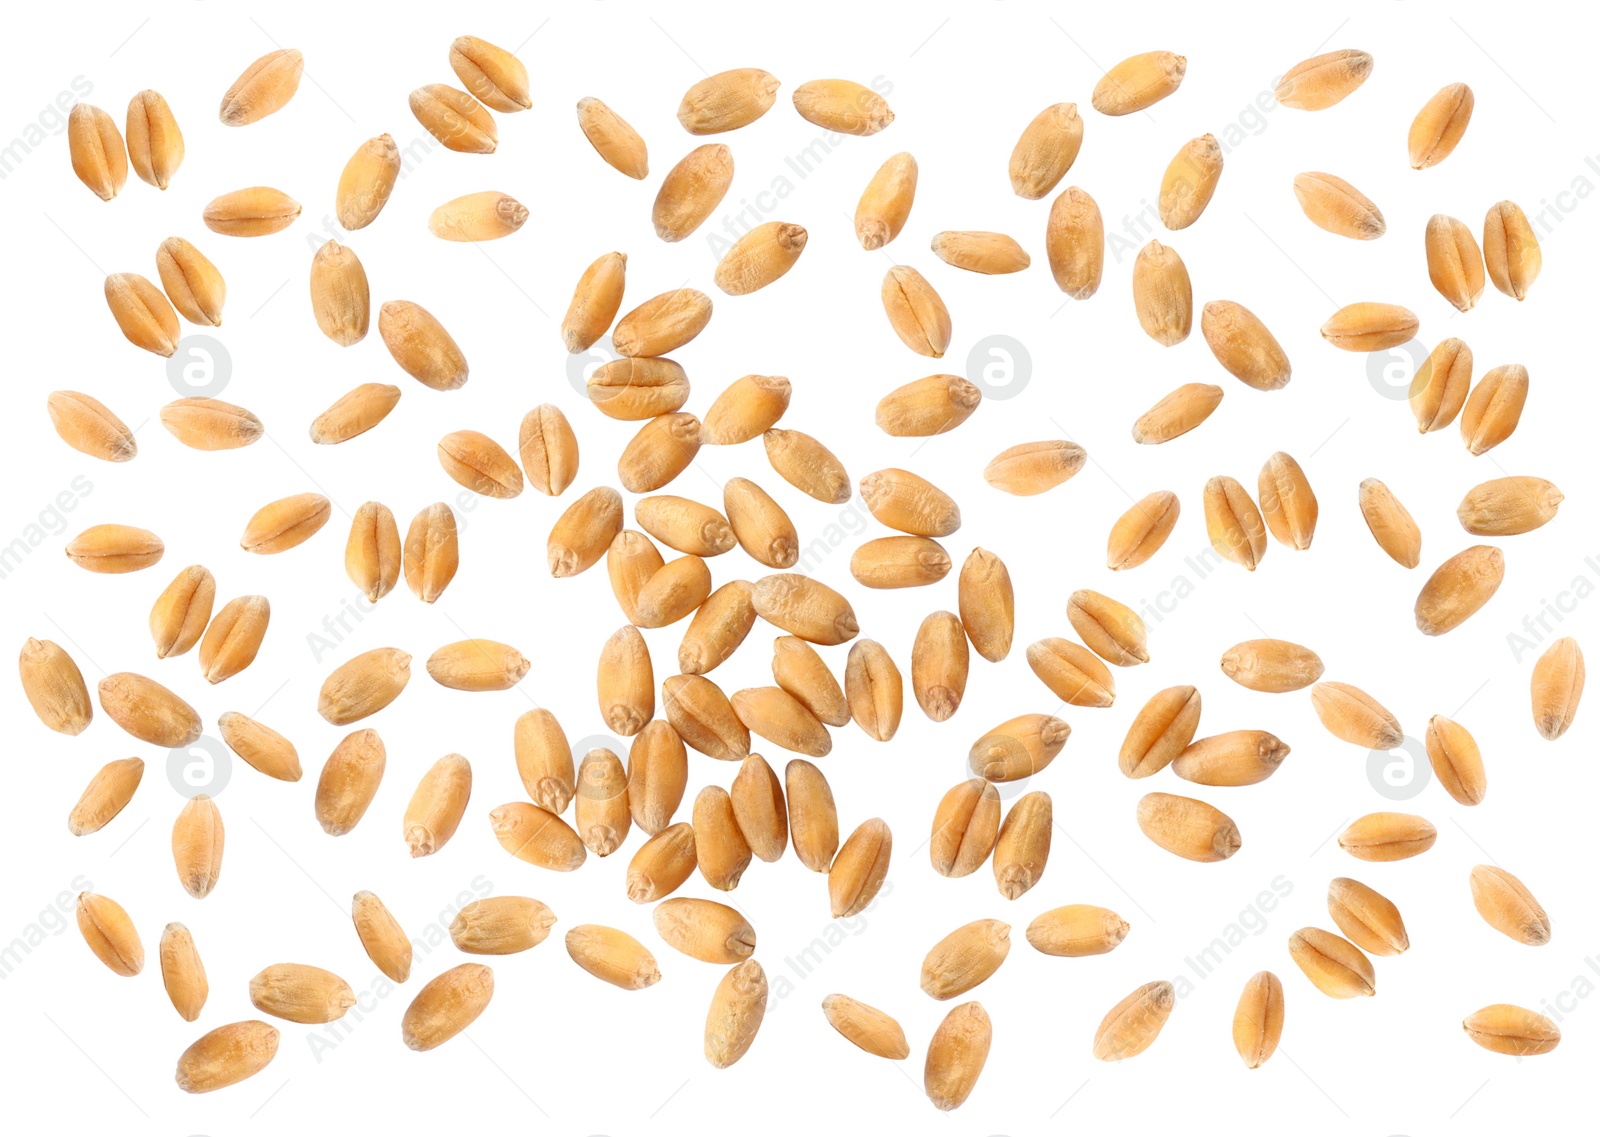 Image of Wheat grains on white background, top view